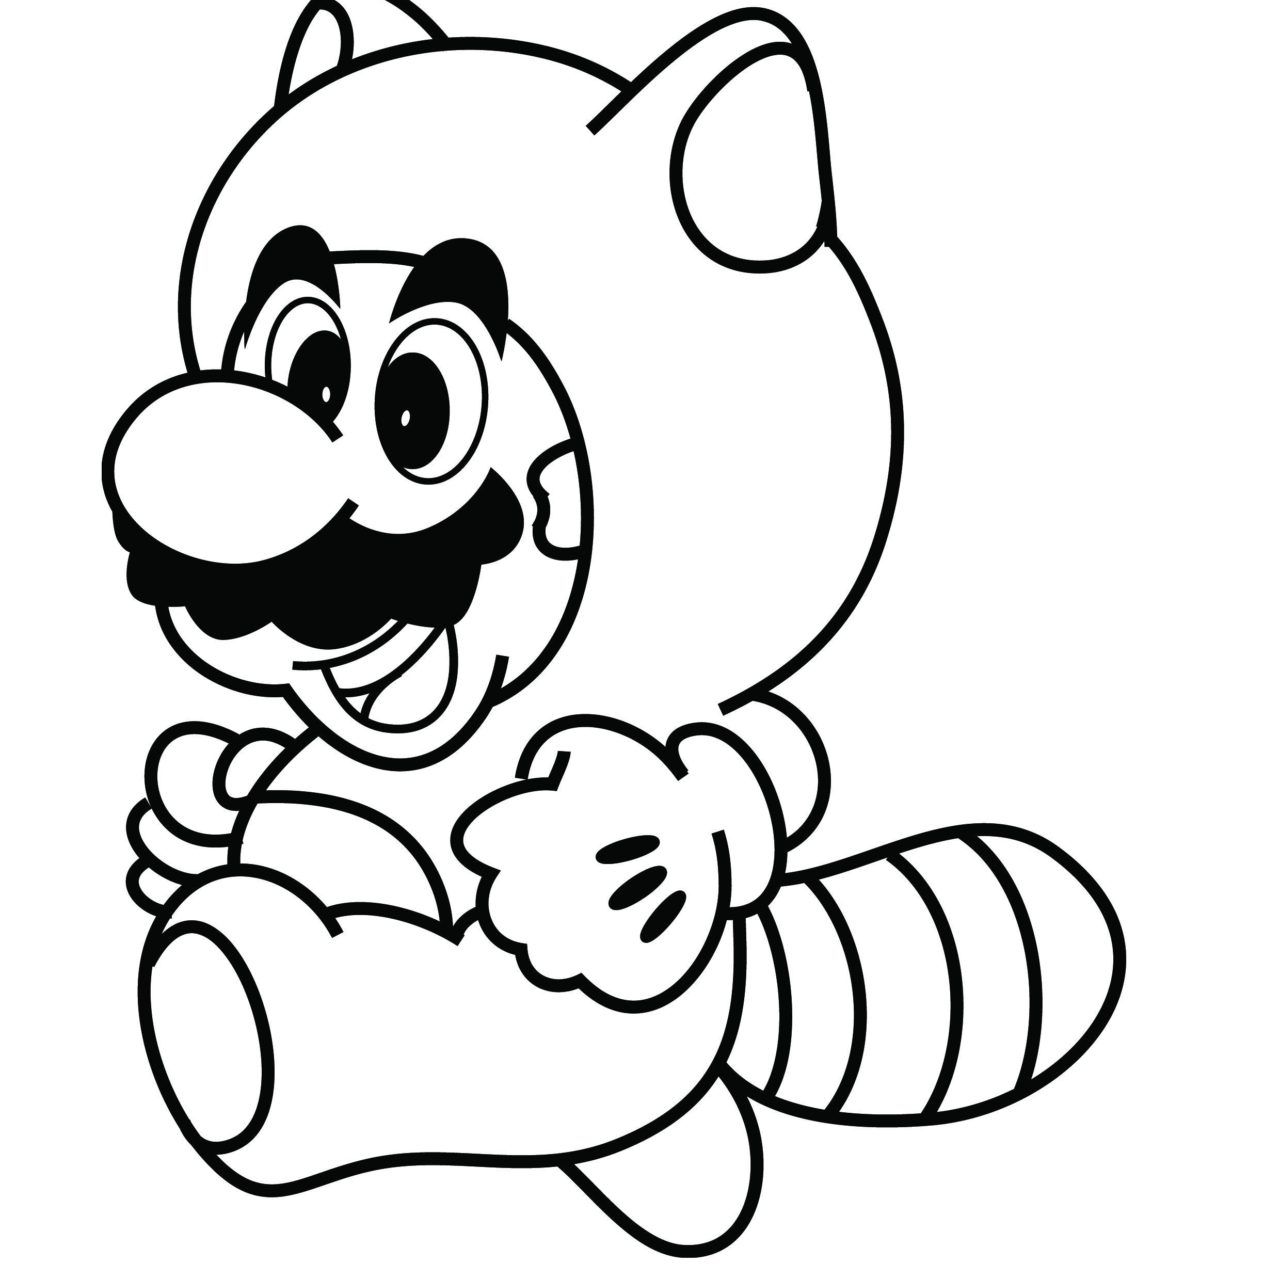 Mario Character Coloring Pages Coloring Home